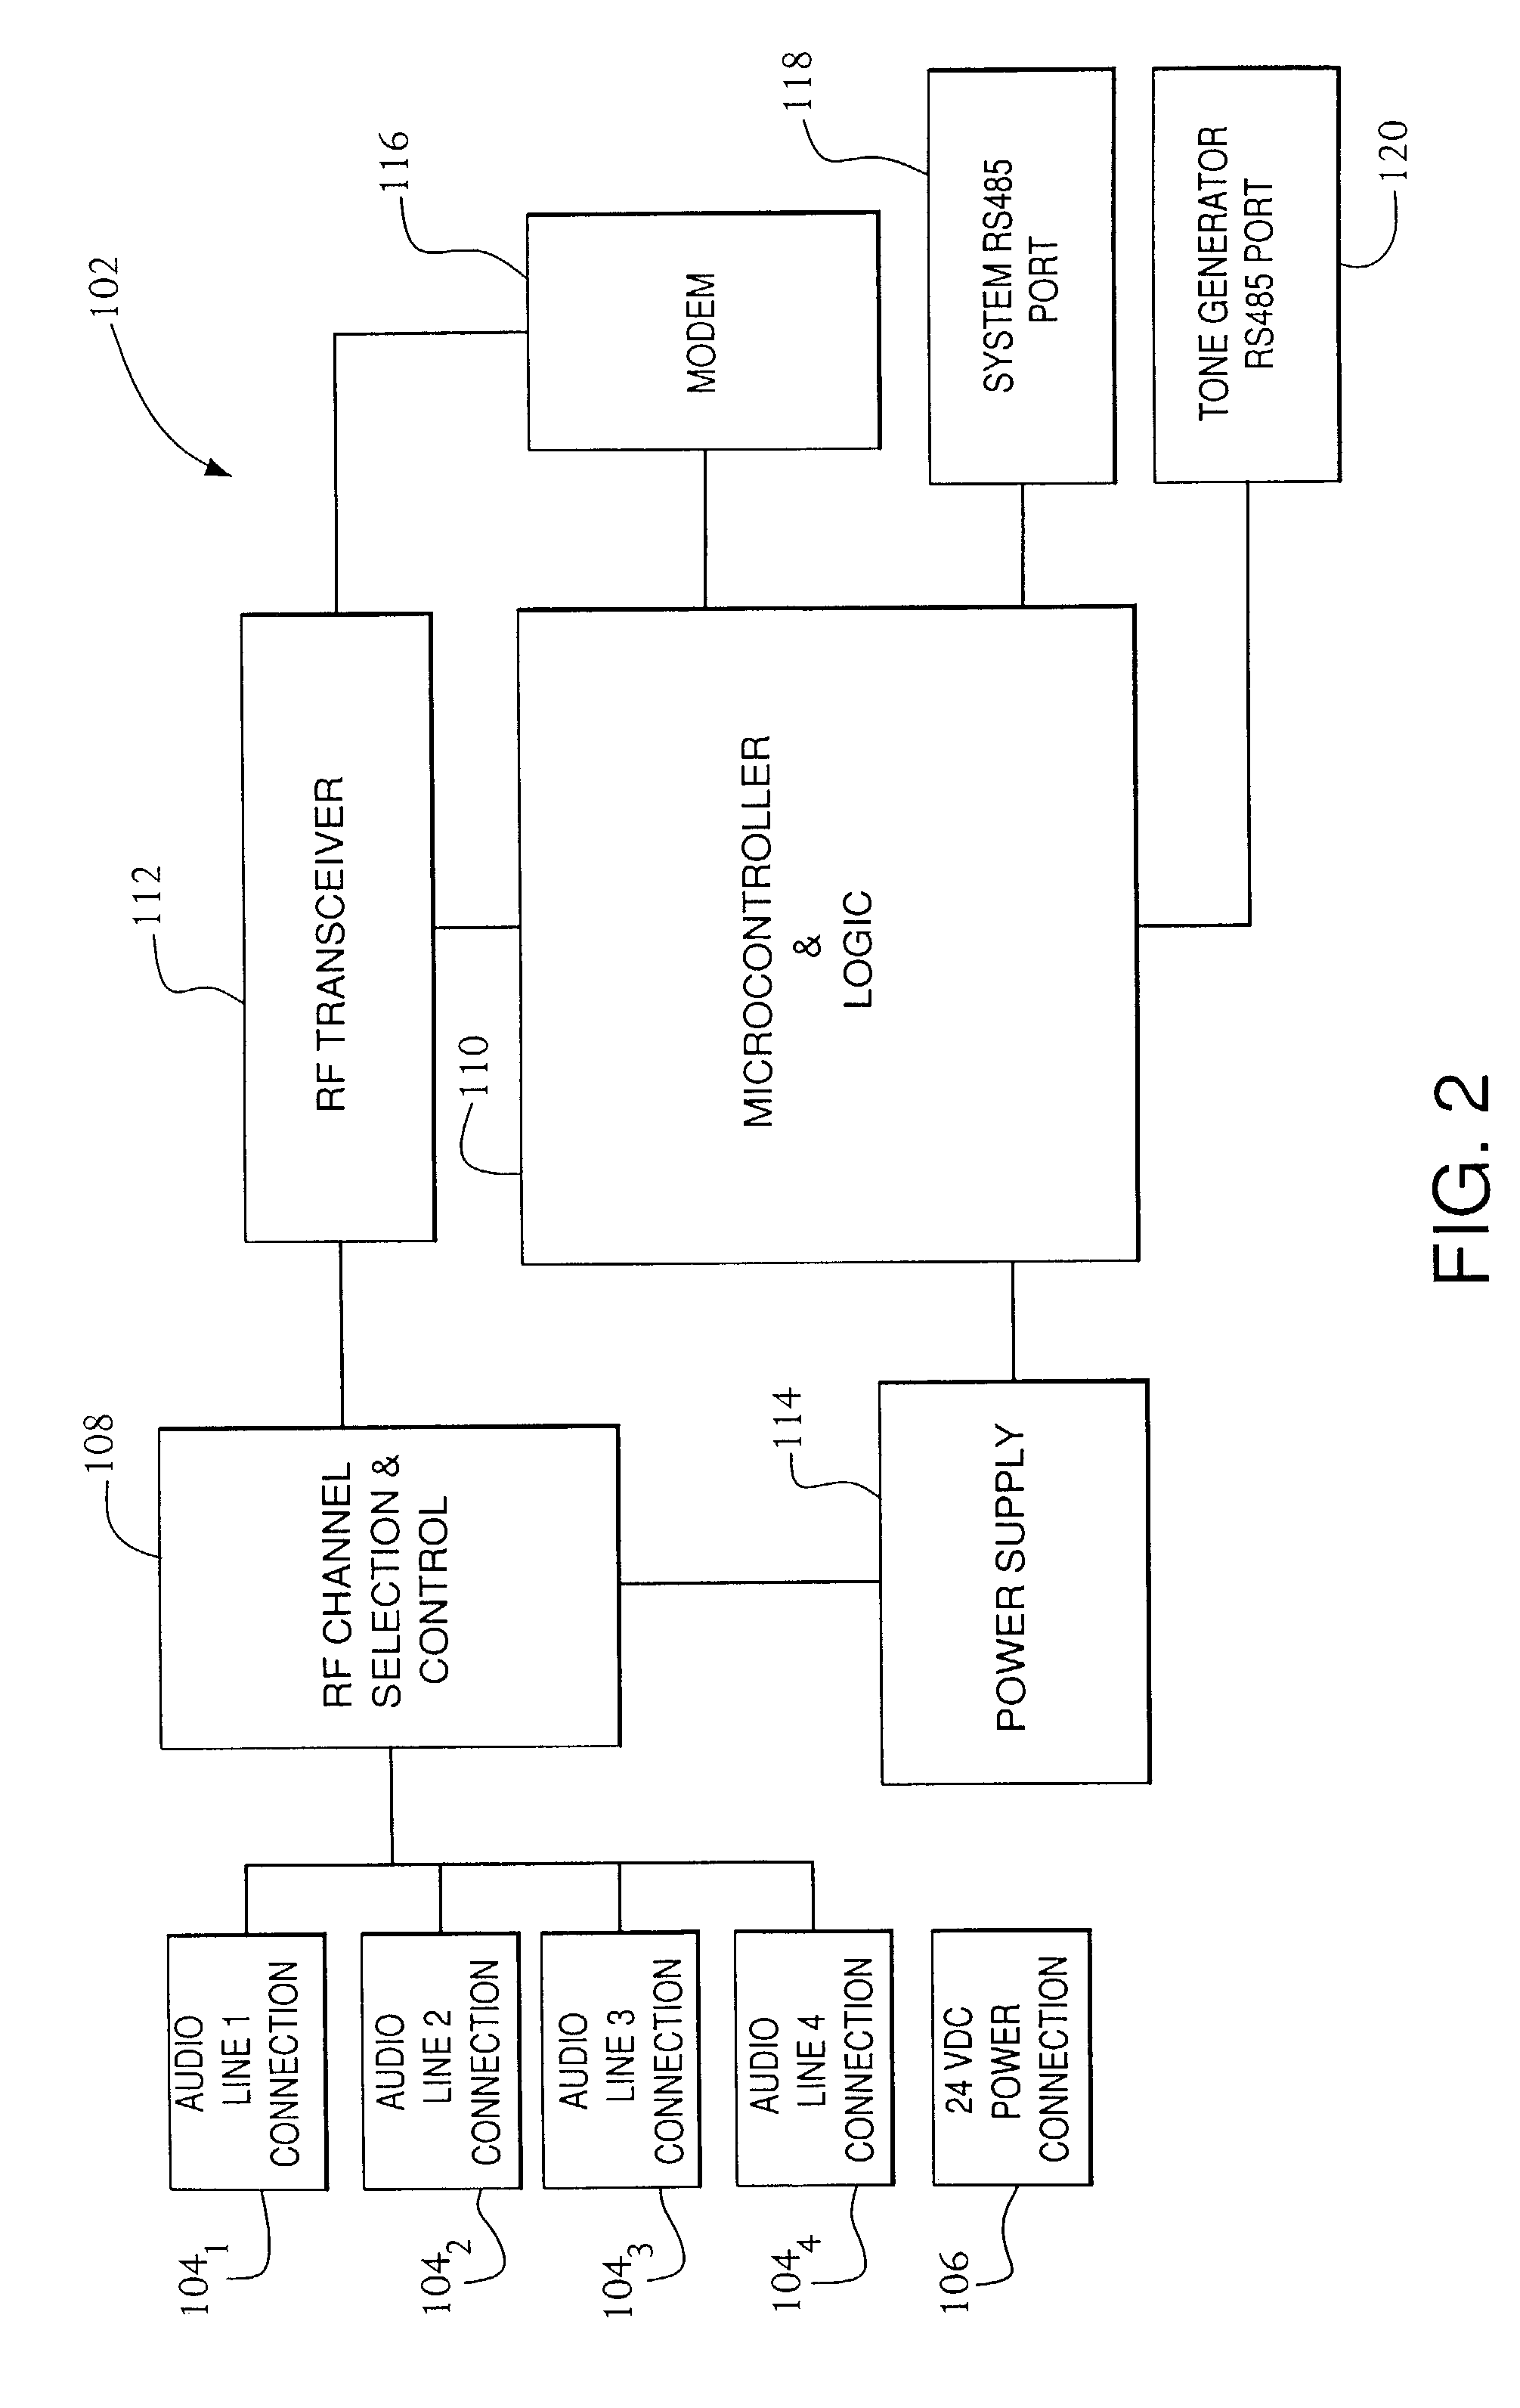 System for controlling remote speakers using centralized amplifiers, centralized monitoring and master/slave communication protocol